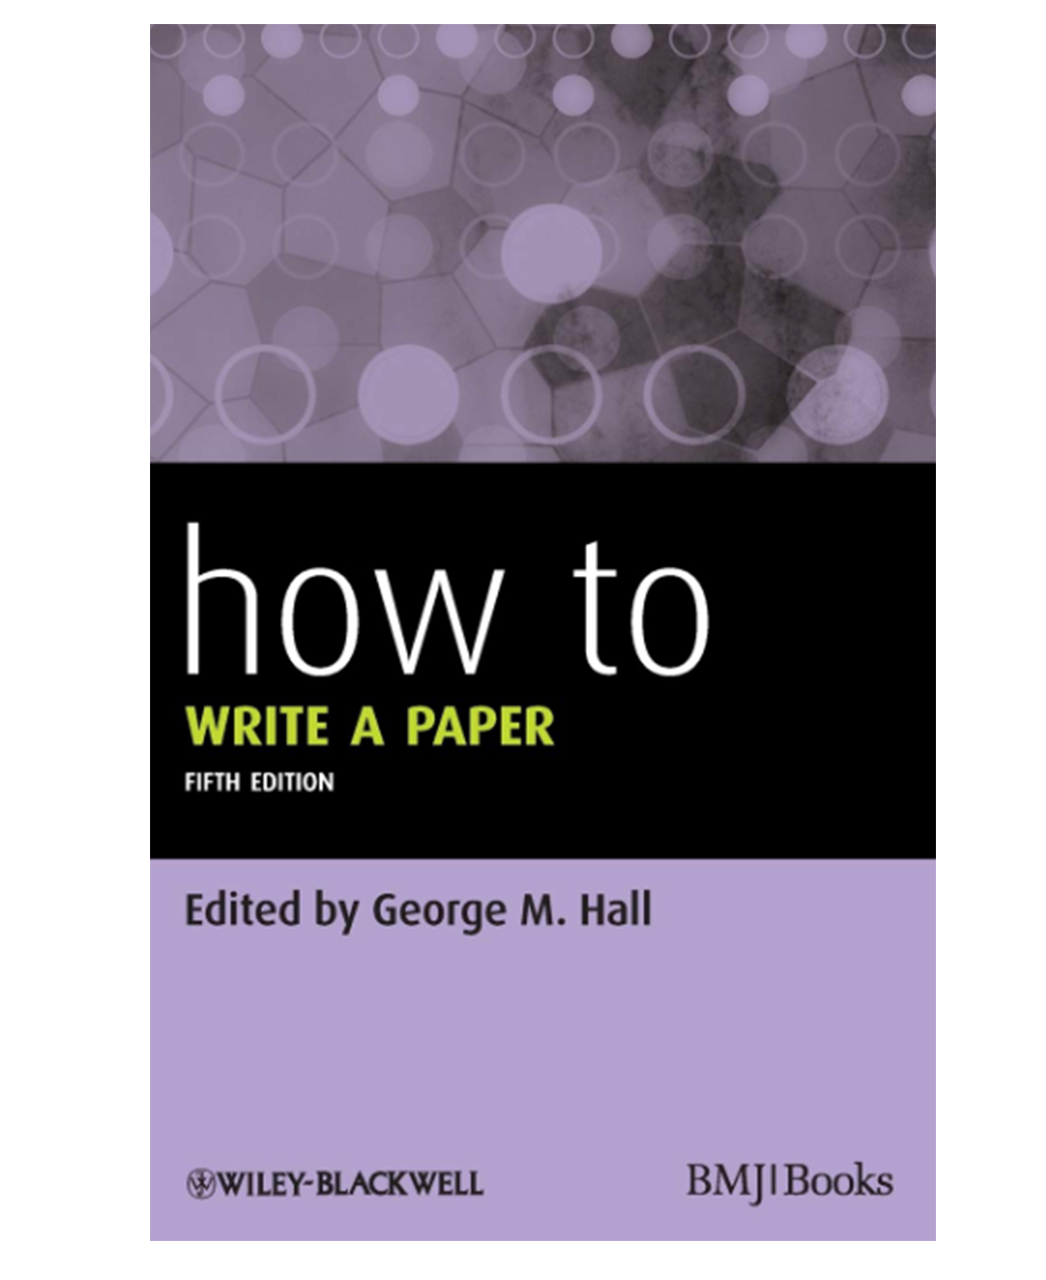 How To Write a Paper 5th Edition